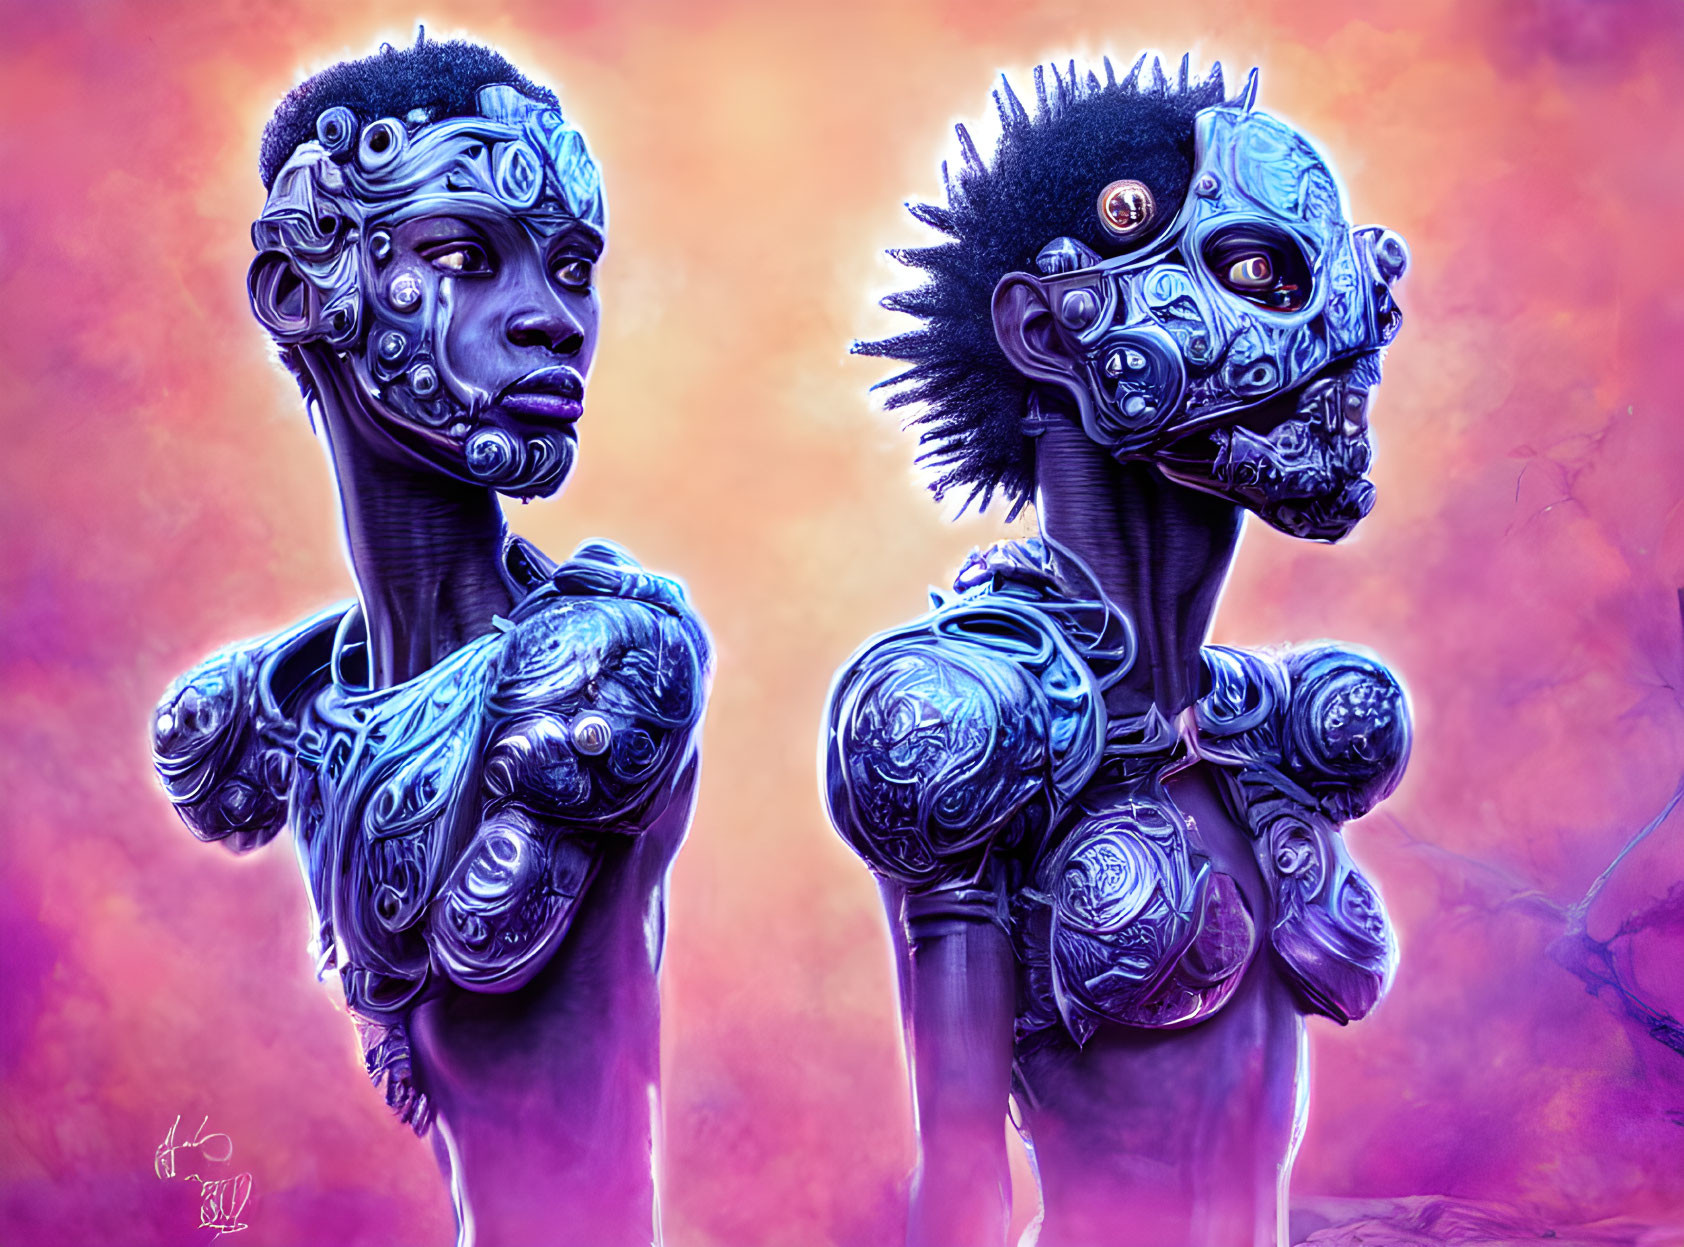 Futuristic African warriors with intricate body markings and armor on purple backdrop